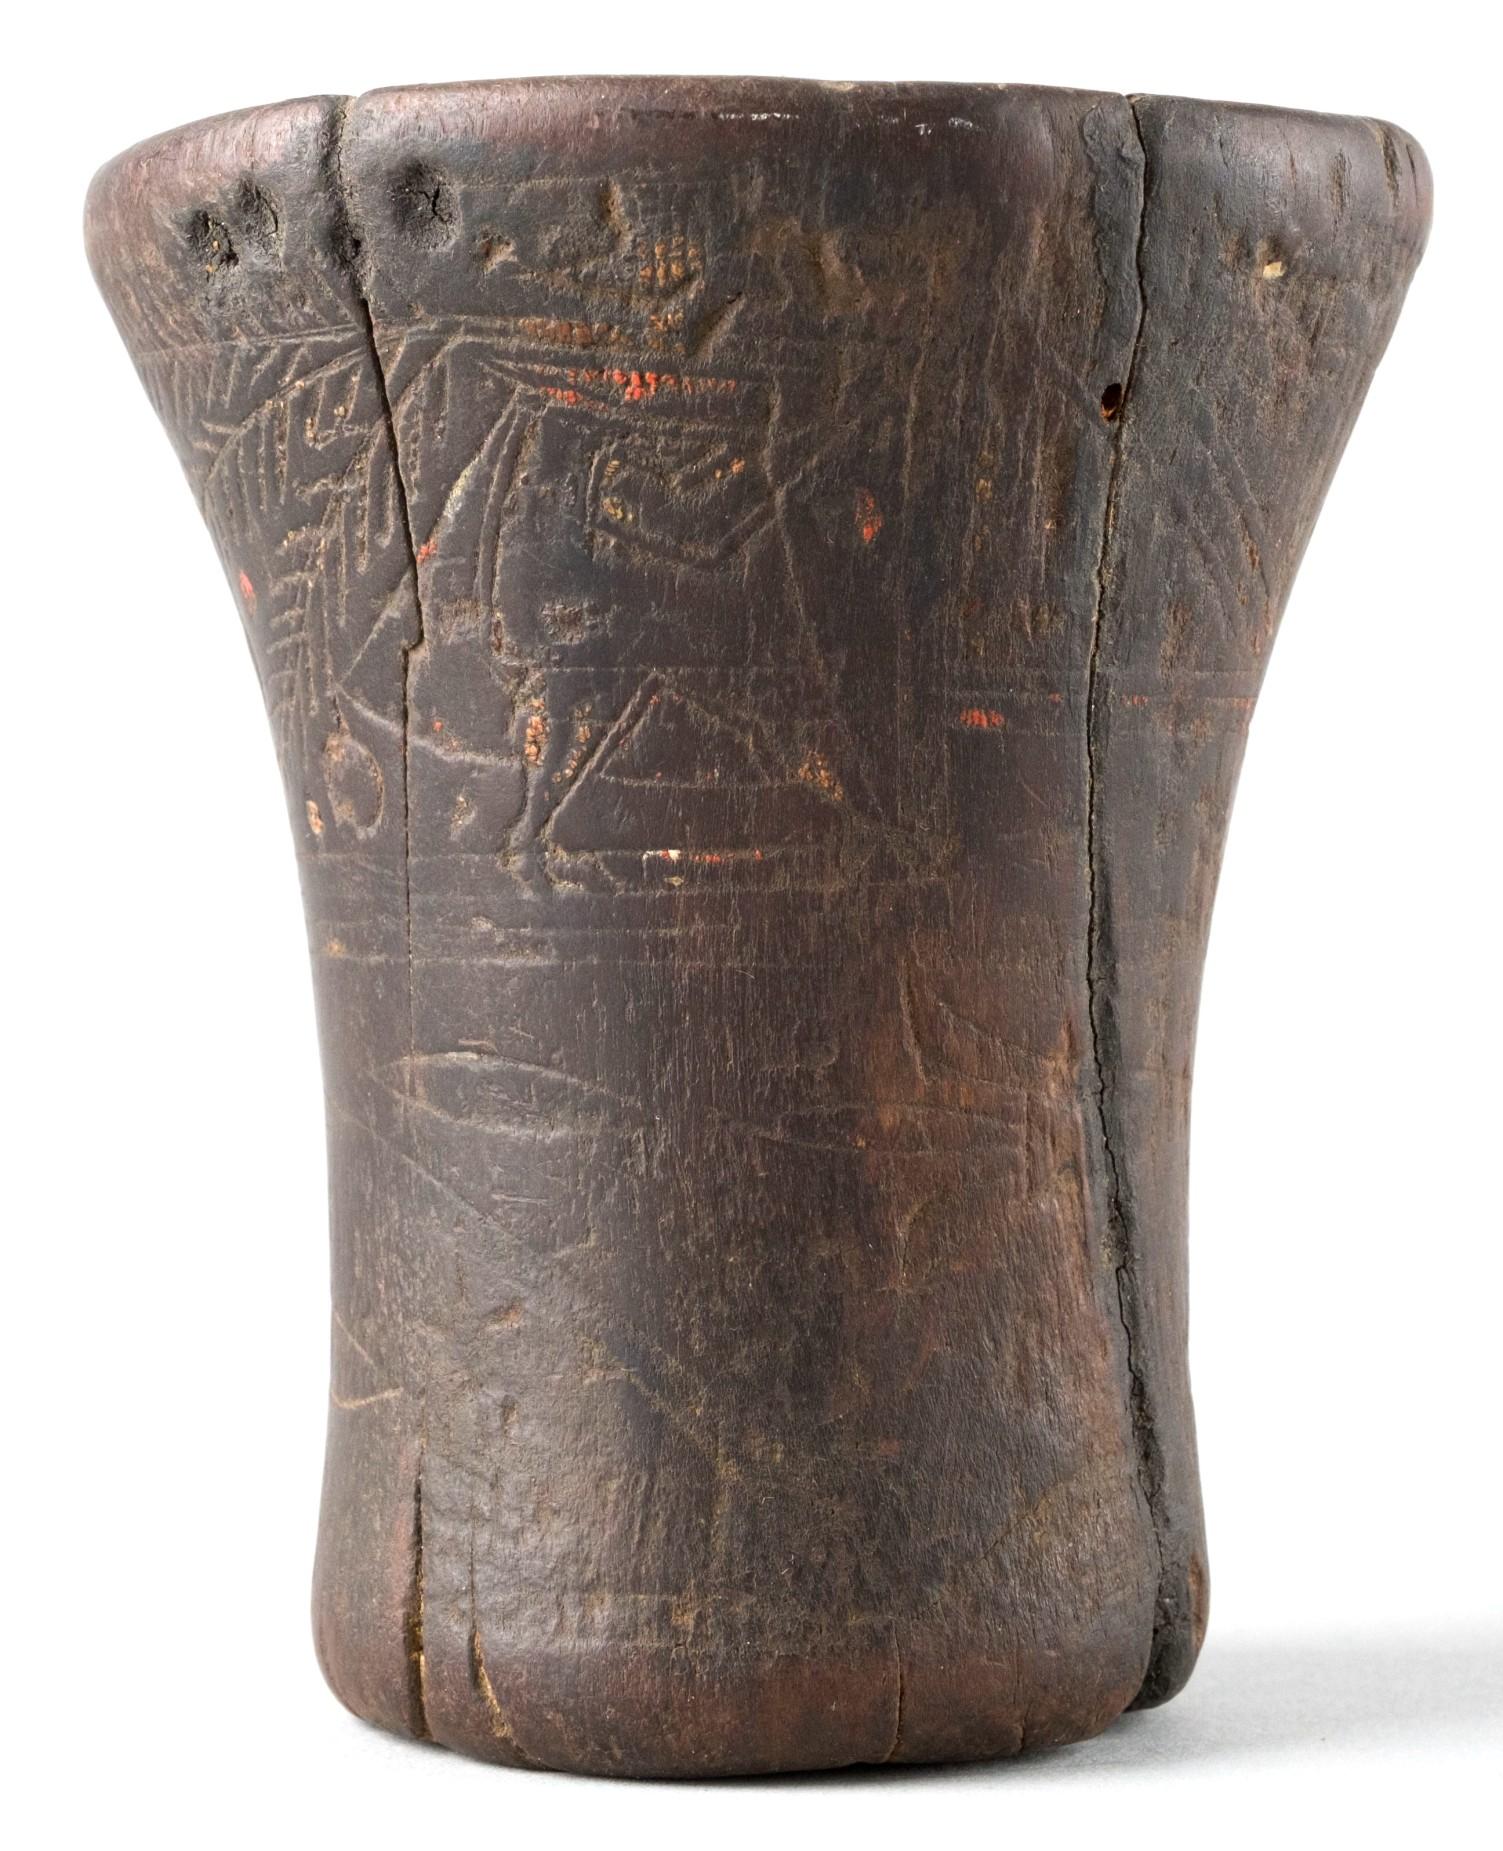 The hand carved beaker-shaped wood drinking vessel was used to drink 'chicha' which was a beer-like beverage made from fermented corn. The weathered exterior showing incised geometric & figural motifs, accented with traces of original hand painted